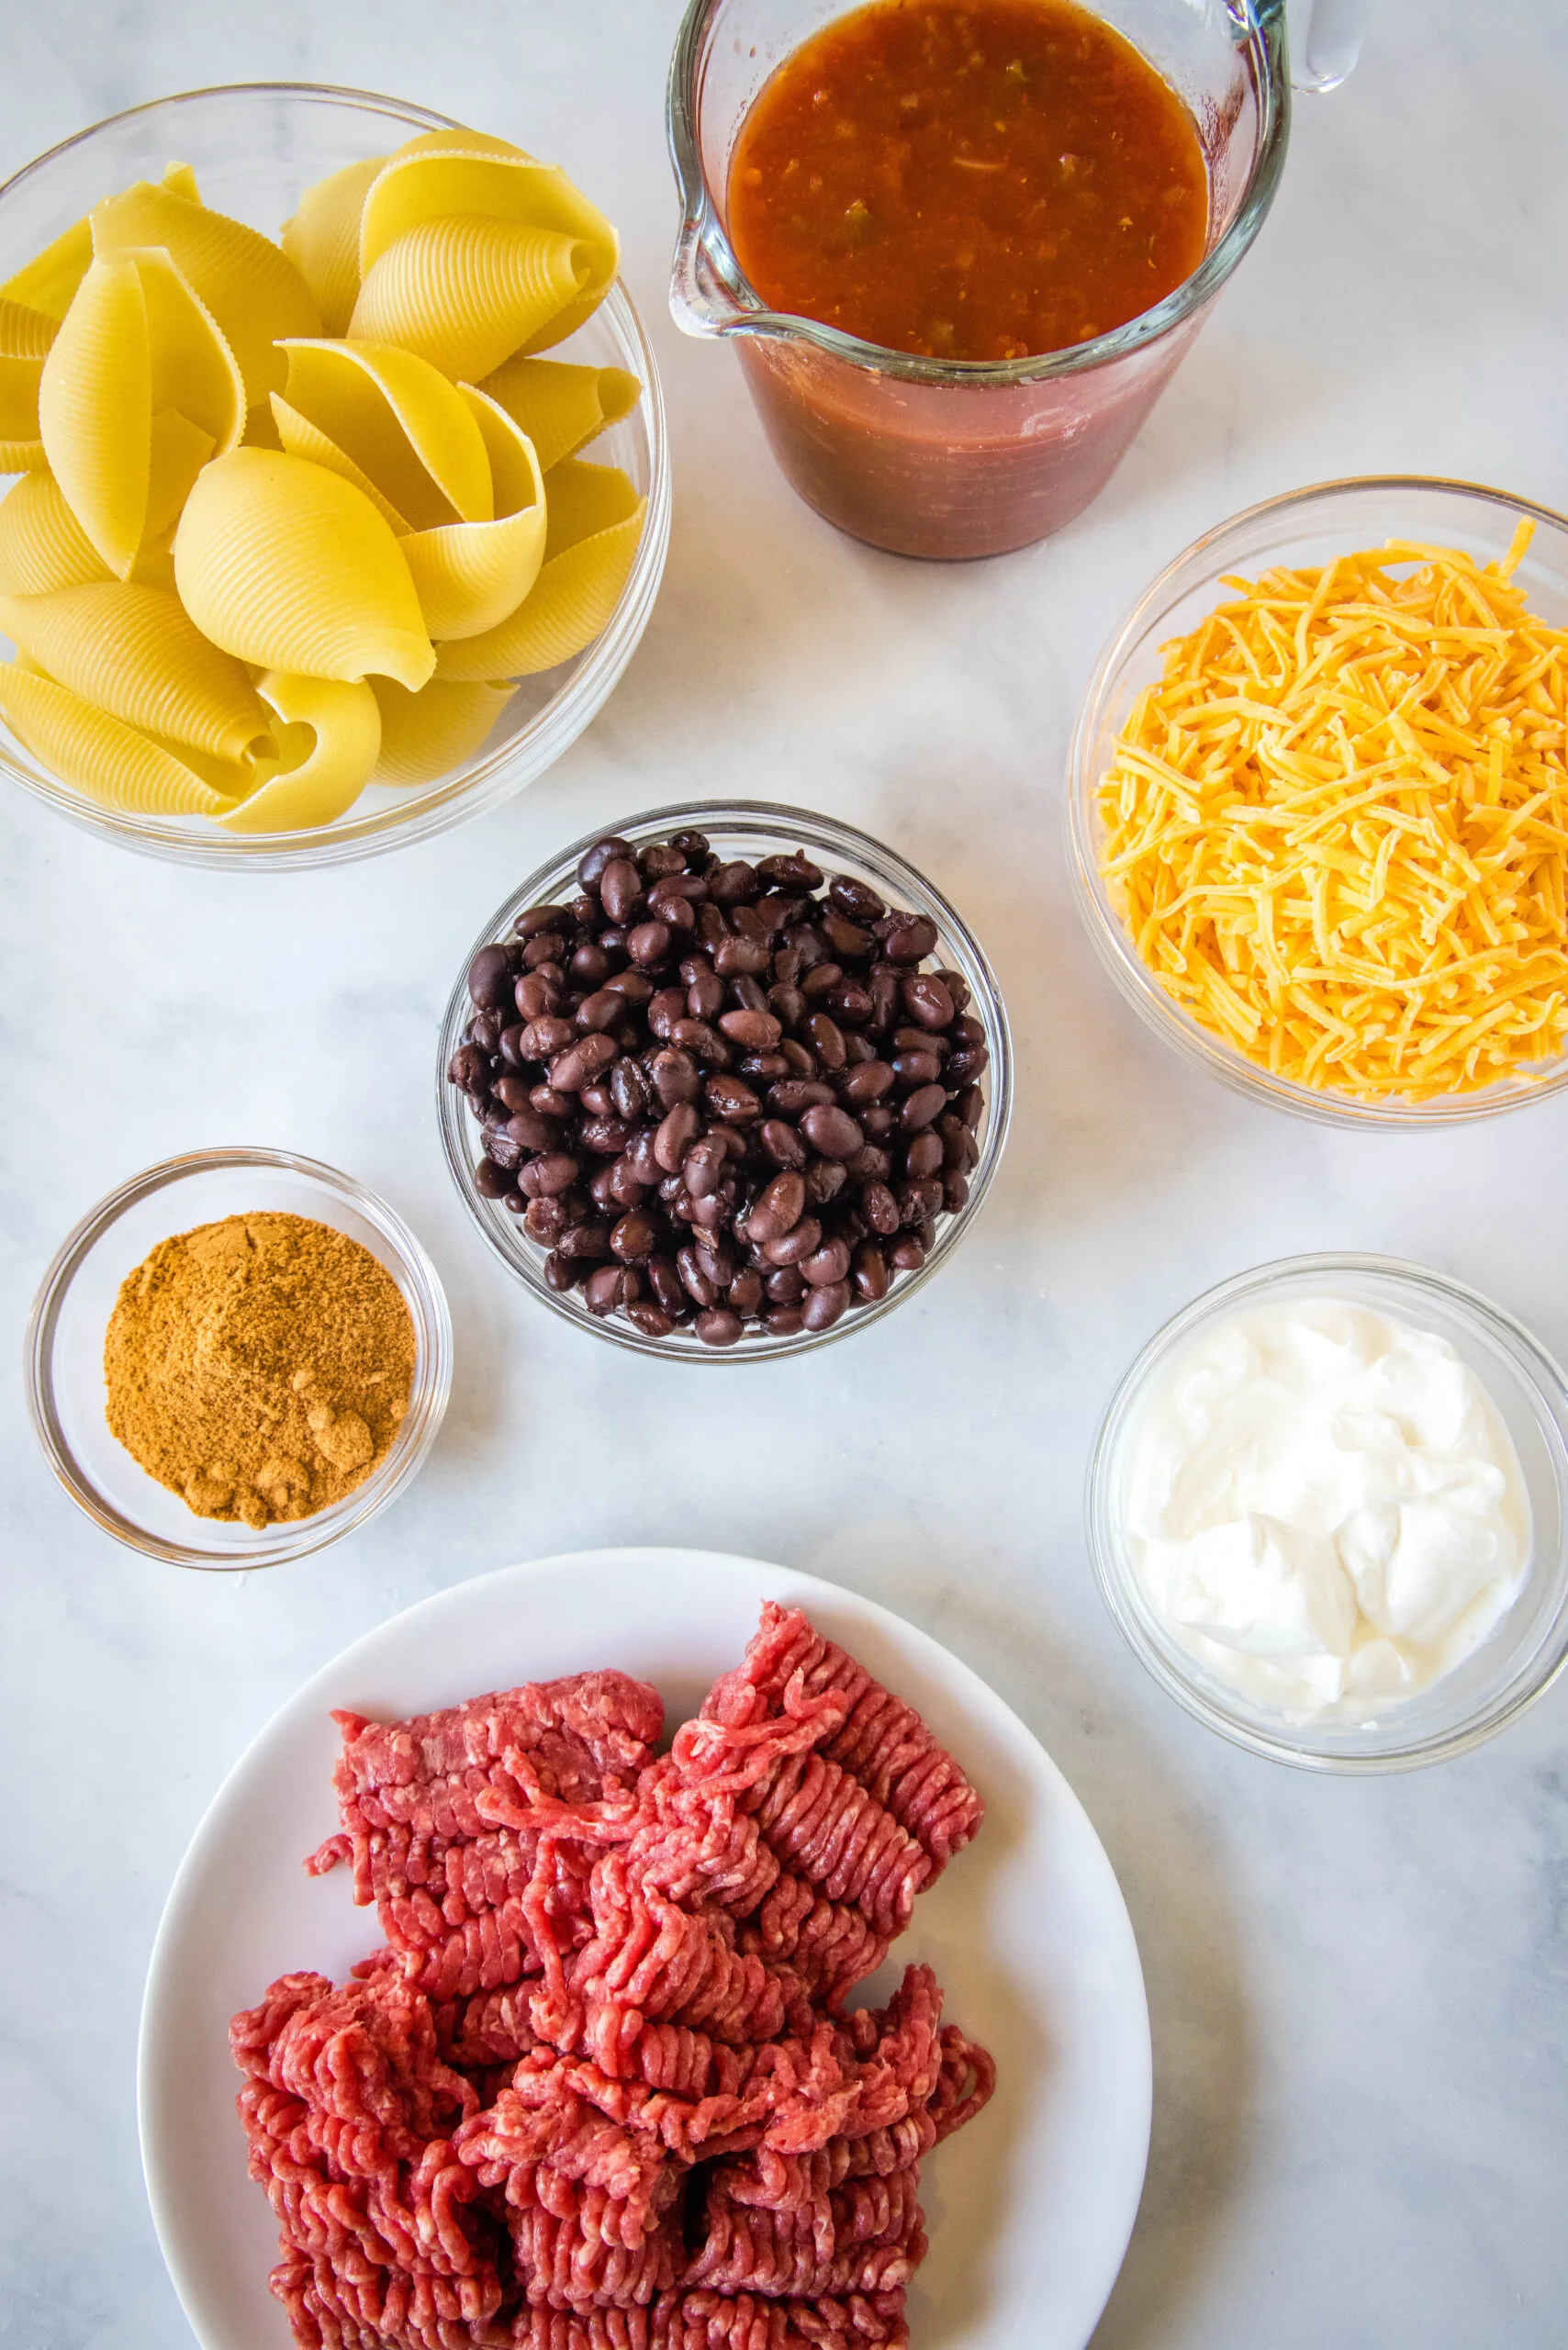 Ingredients for taco stuffed shells.